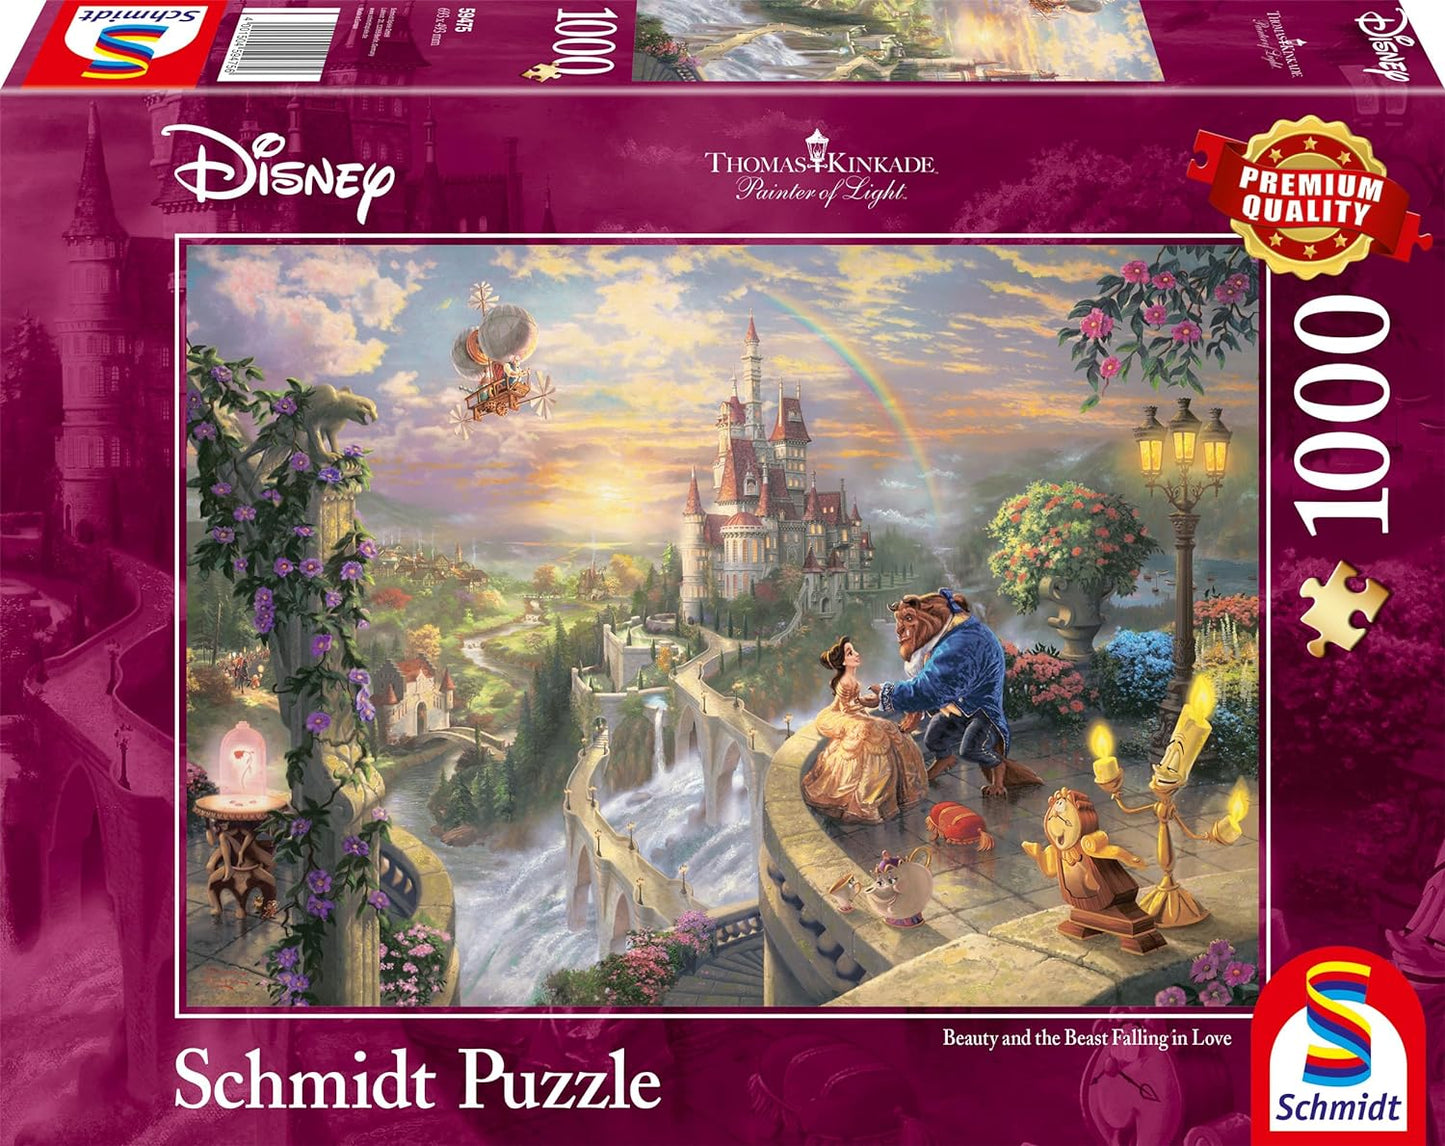 Schmidt - Thomas Kinkade: Disney Beauty and the Beast Falling in Love - 1000 Piece Jigsaw Puzzle